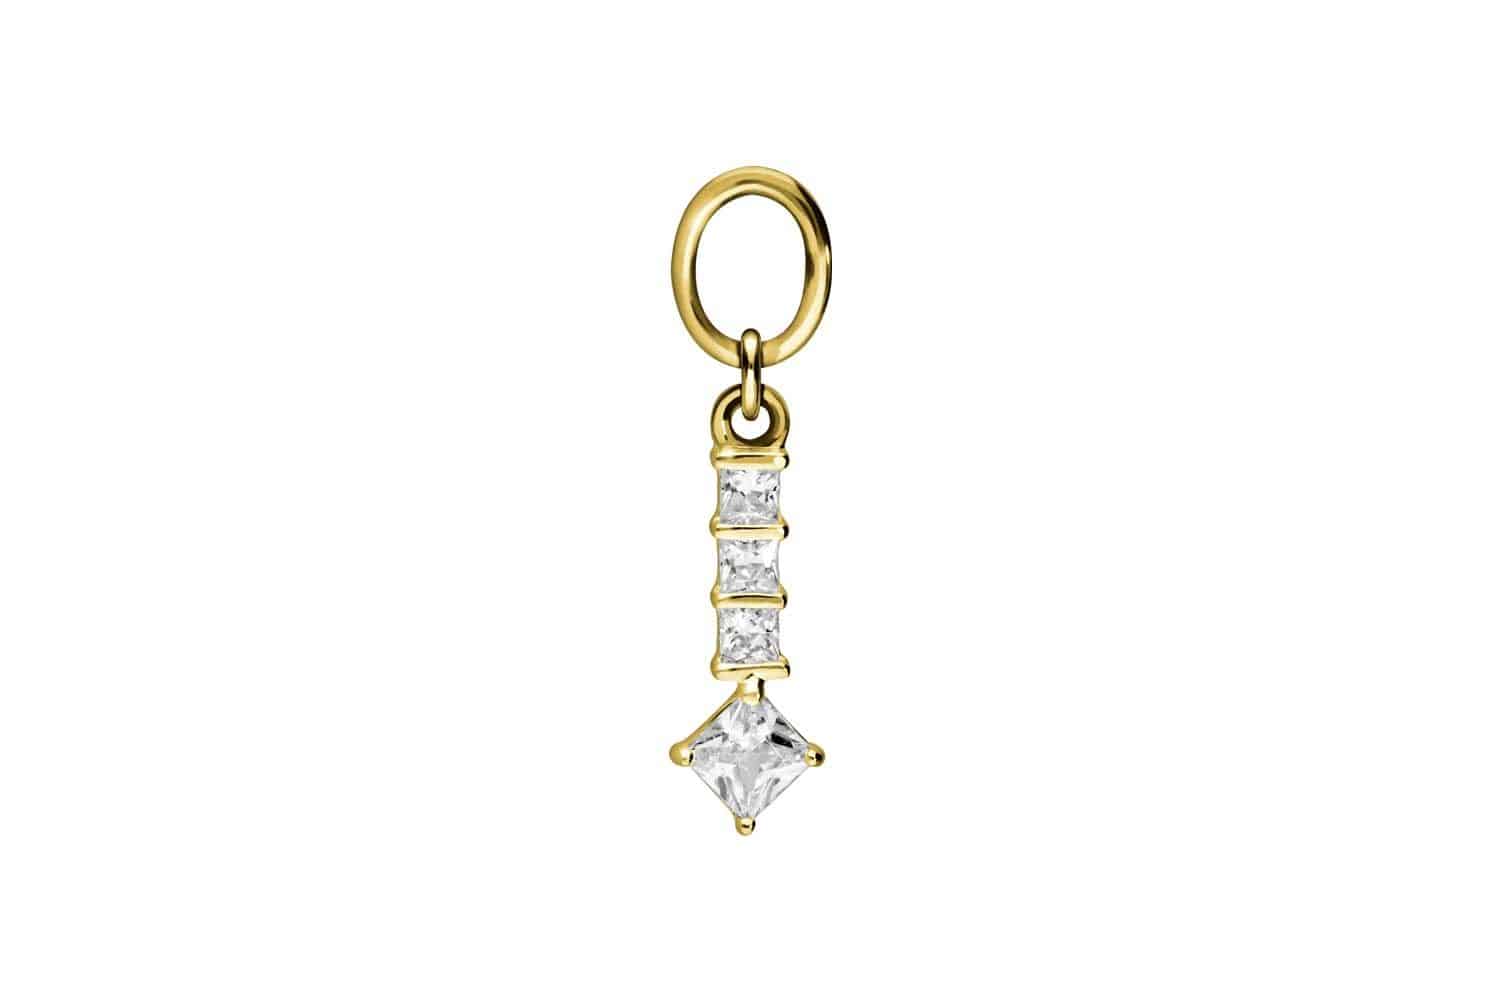 18 carat gold pendant for clickers 4 SETTED CRYSTALS